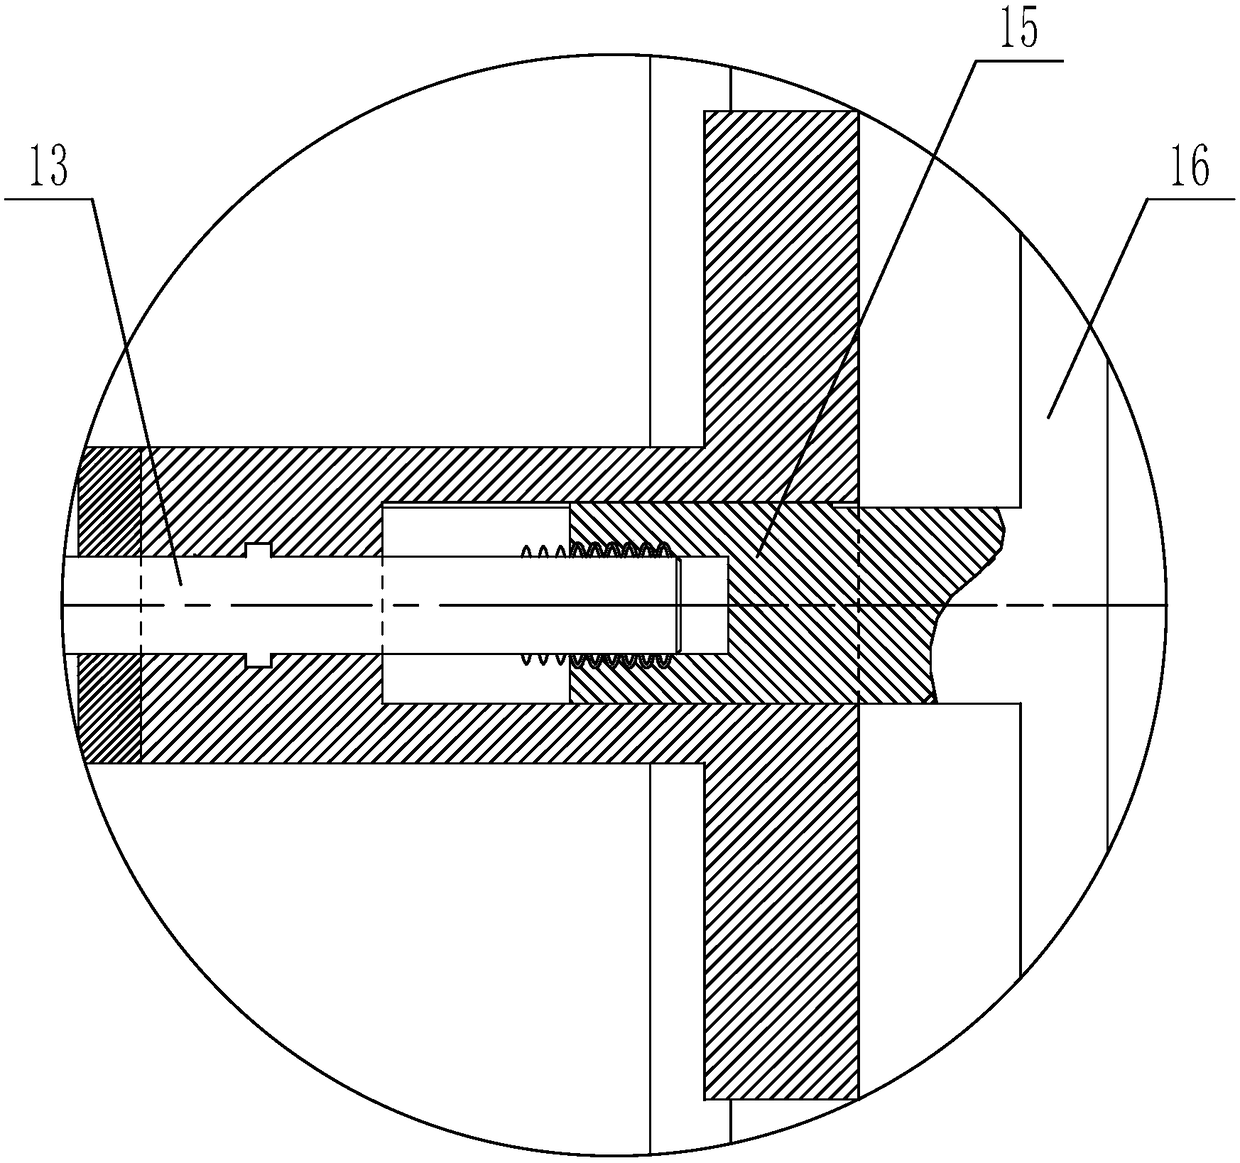 A flaw detection structure for steel pipe surface defect detection